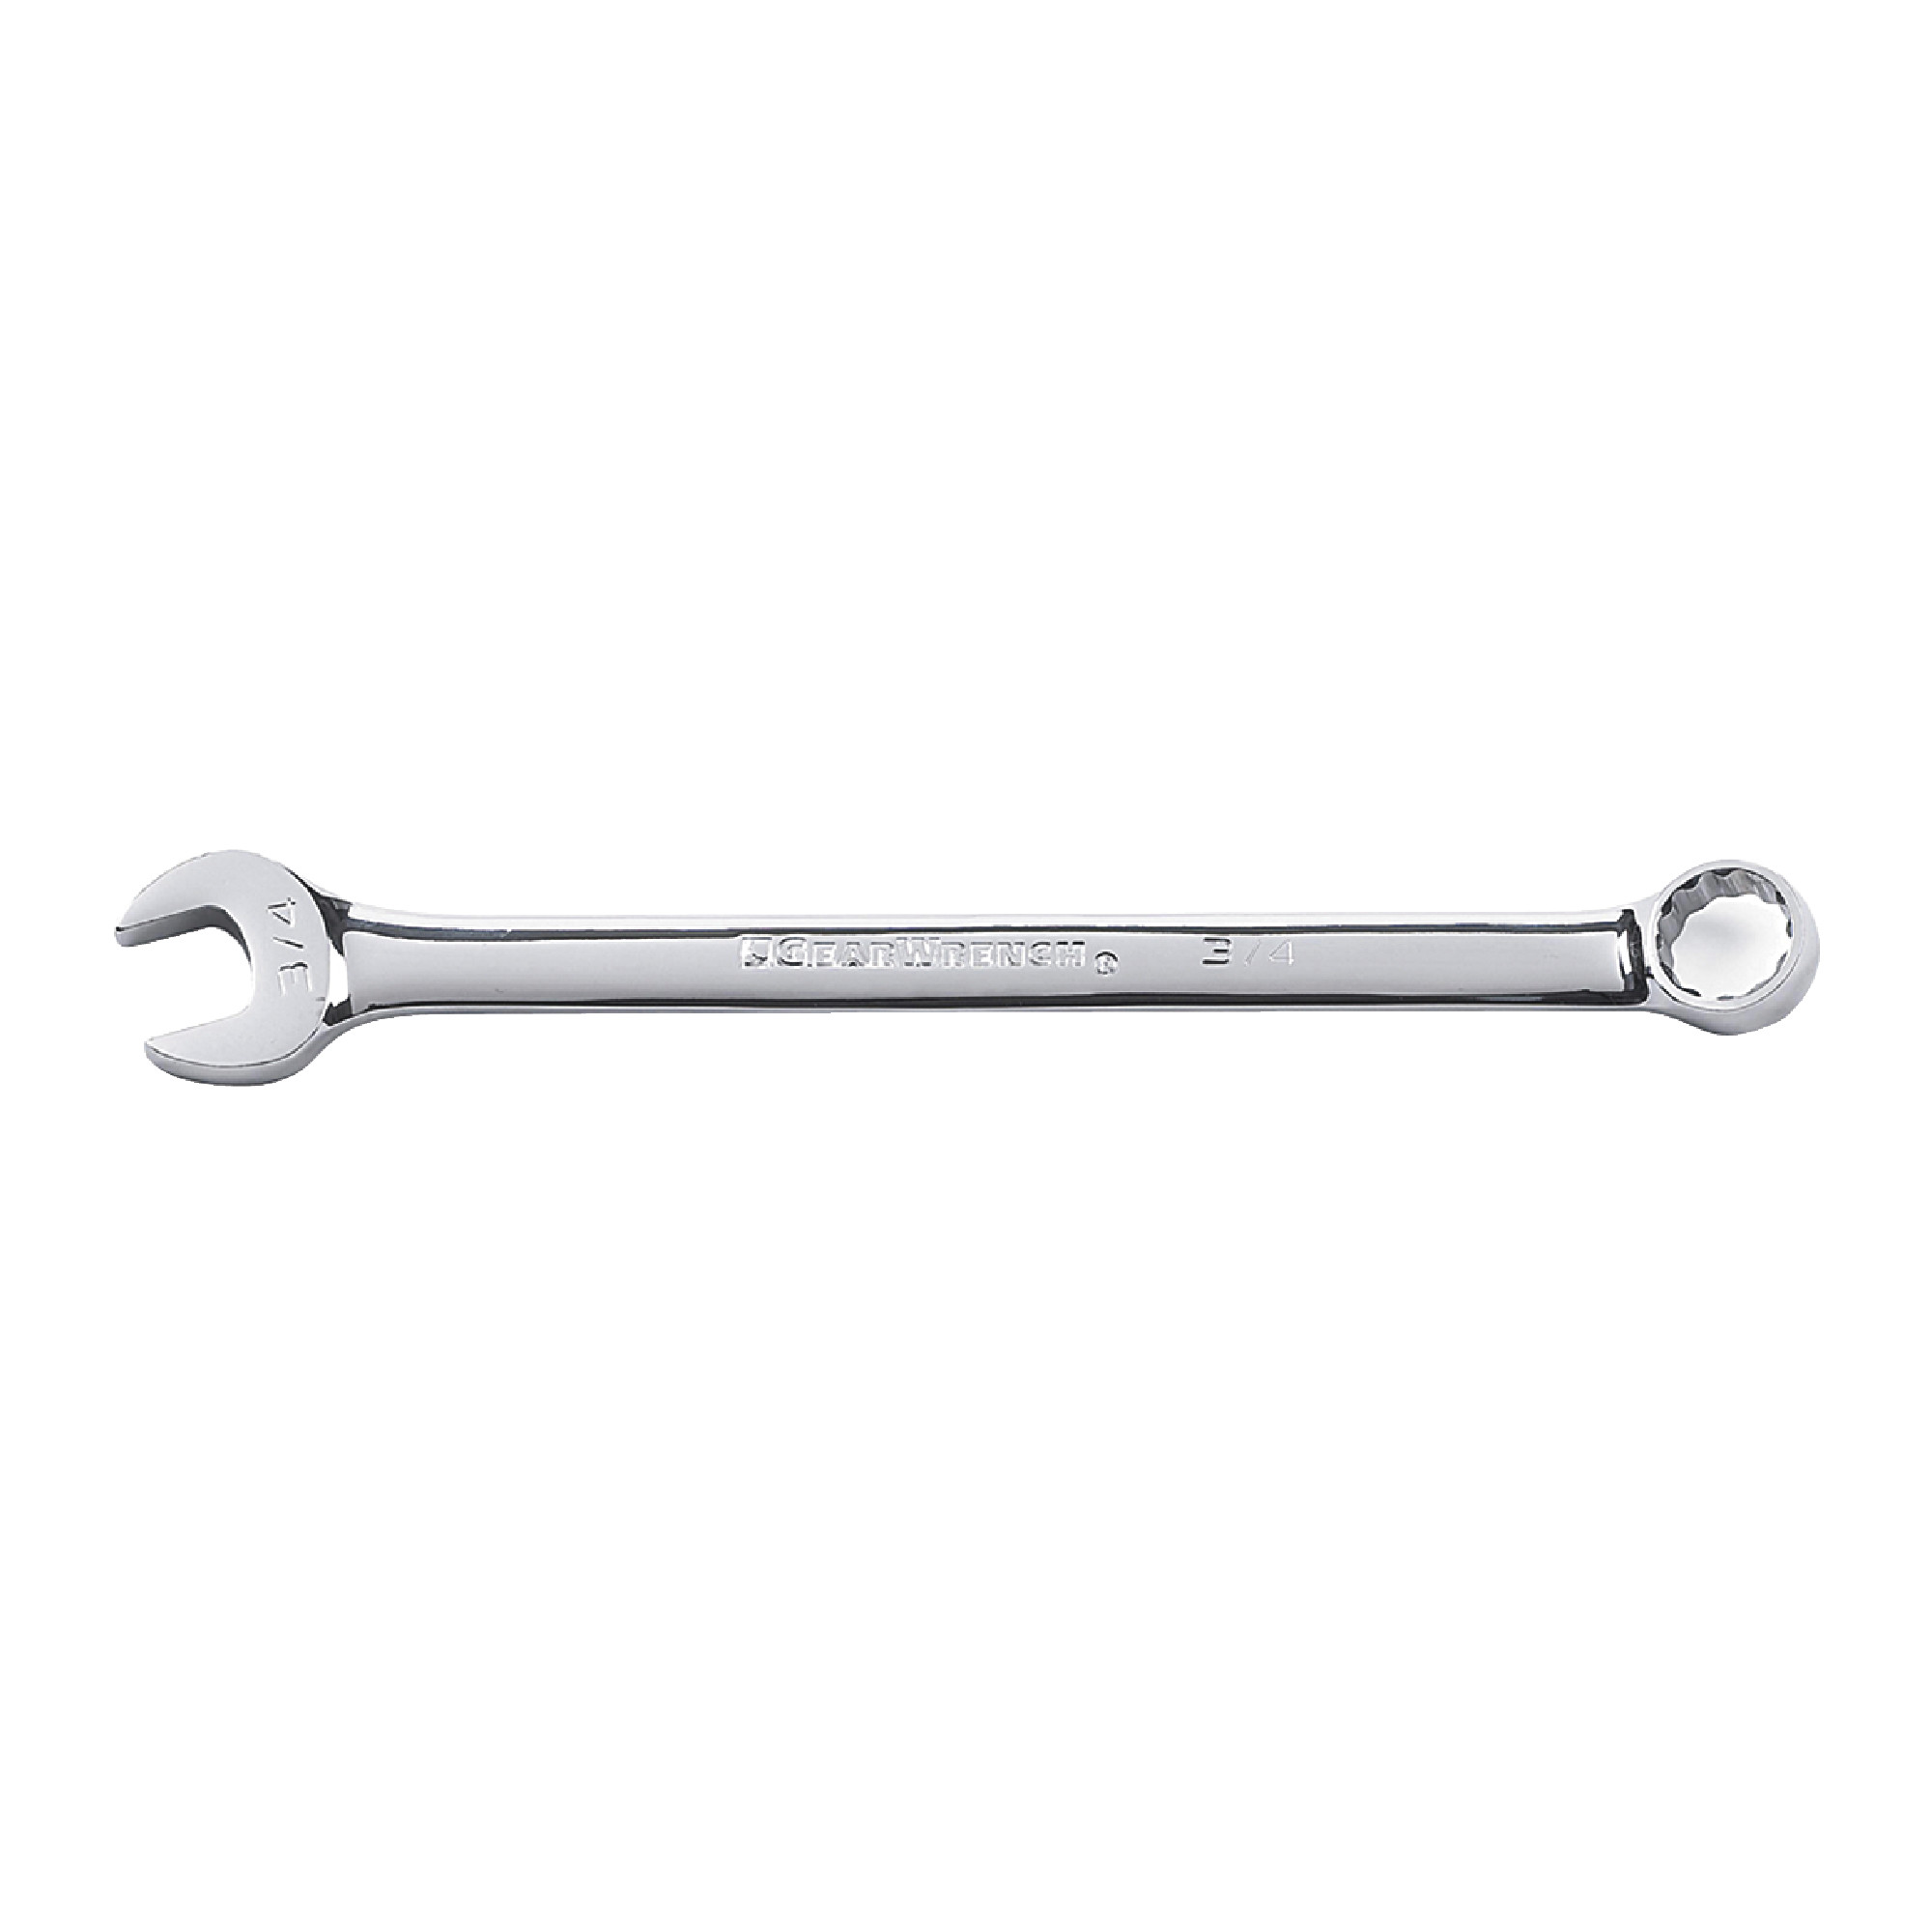 30mm 12 Point Long Pattern Combination Wrench